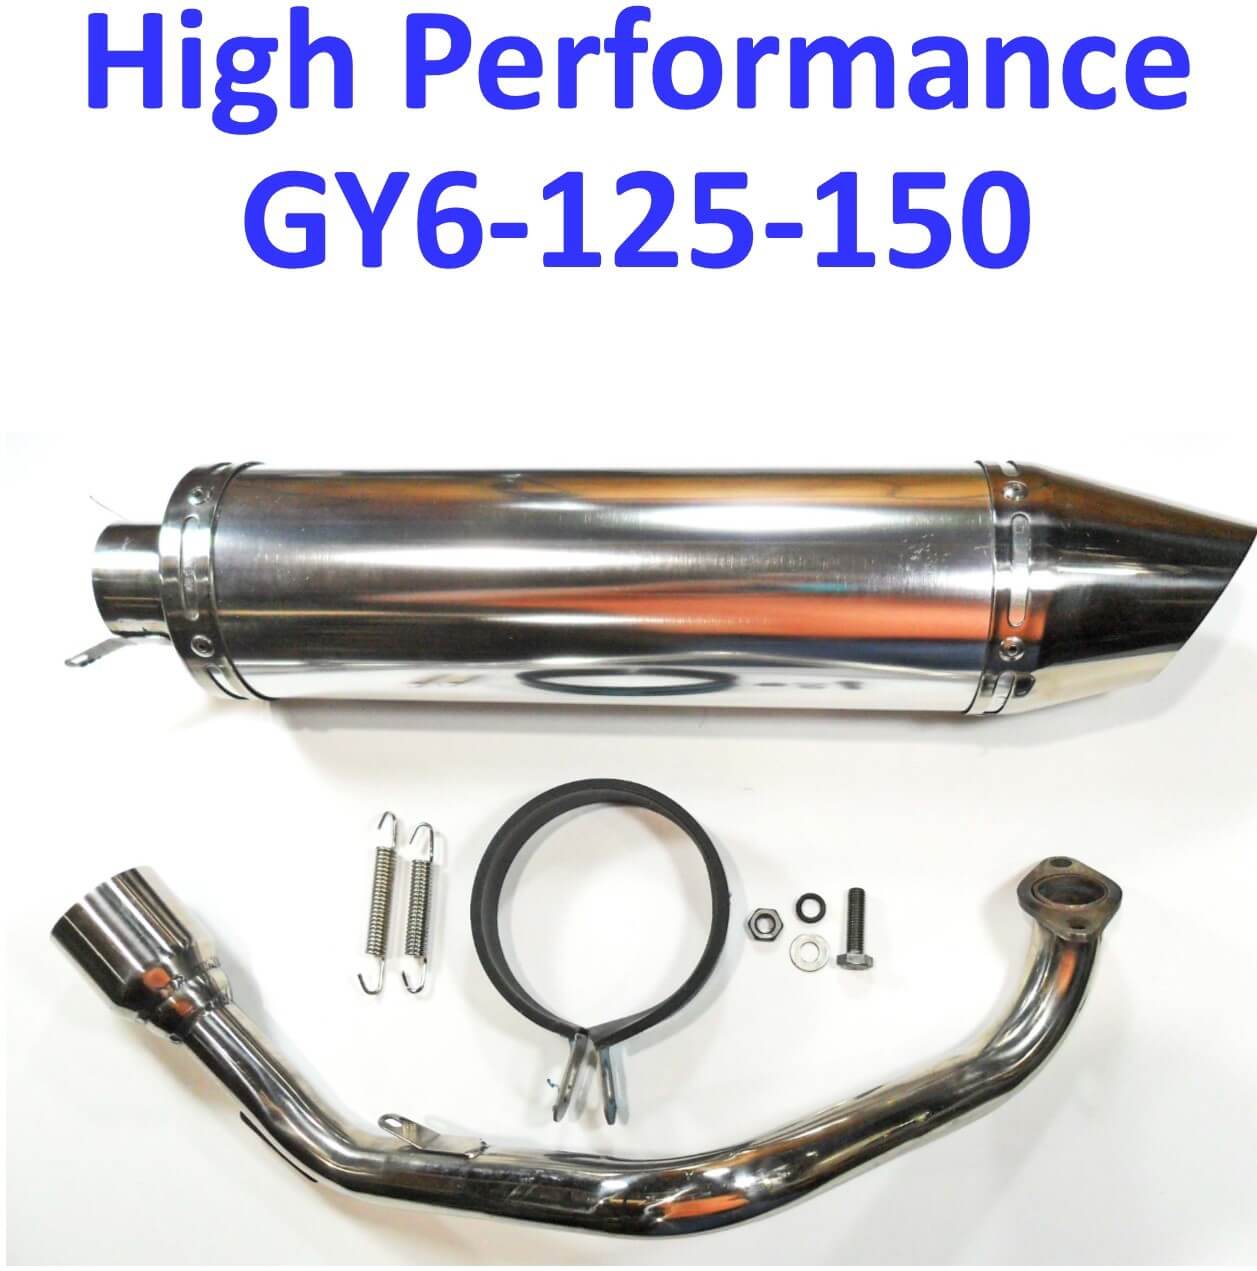 Exhaust Pipe HIGH PERFORMANCE - CHROME Fits Most GY6-125, GY6-150 Chinese Scooters Canister L=340mm D=100mm - Click Image to Close